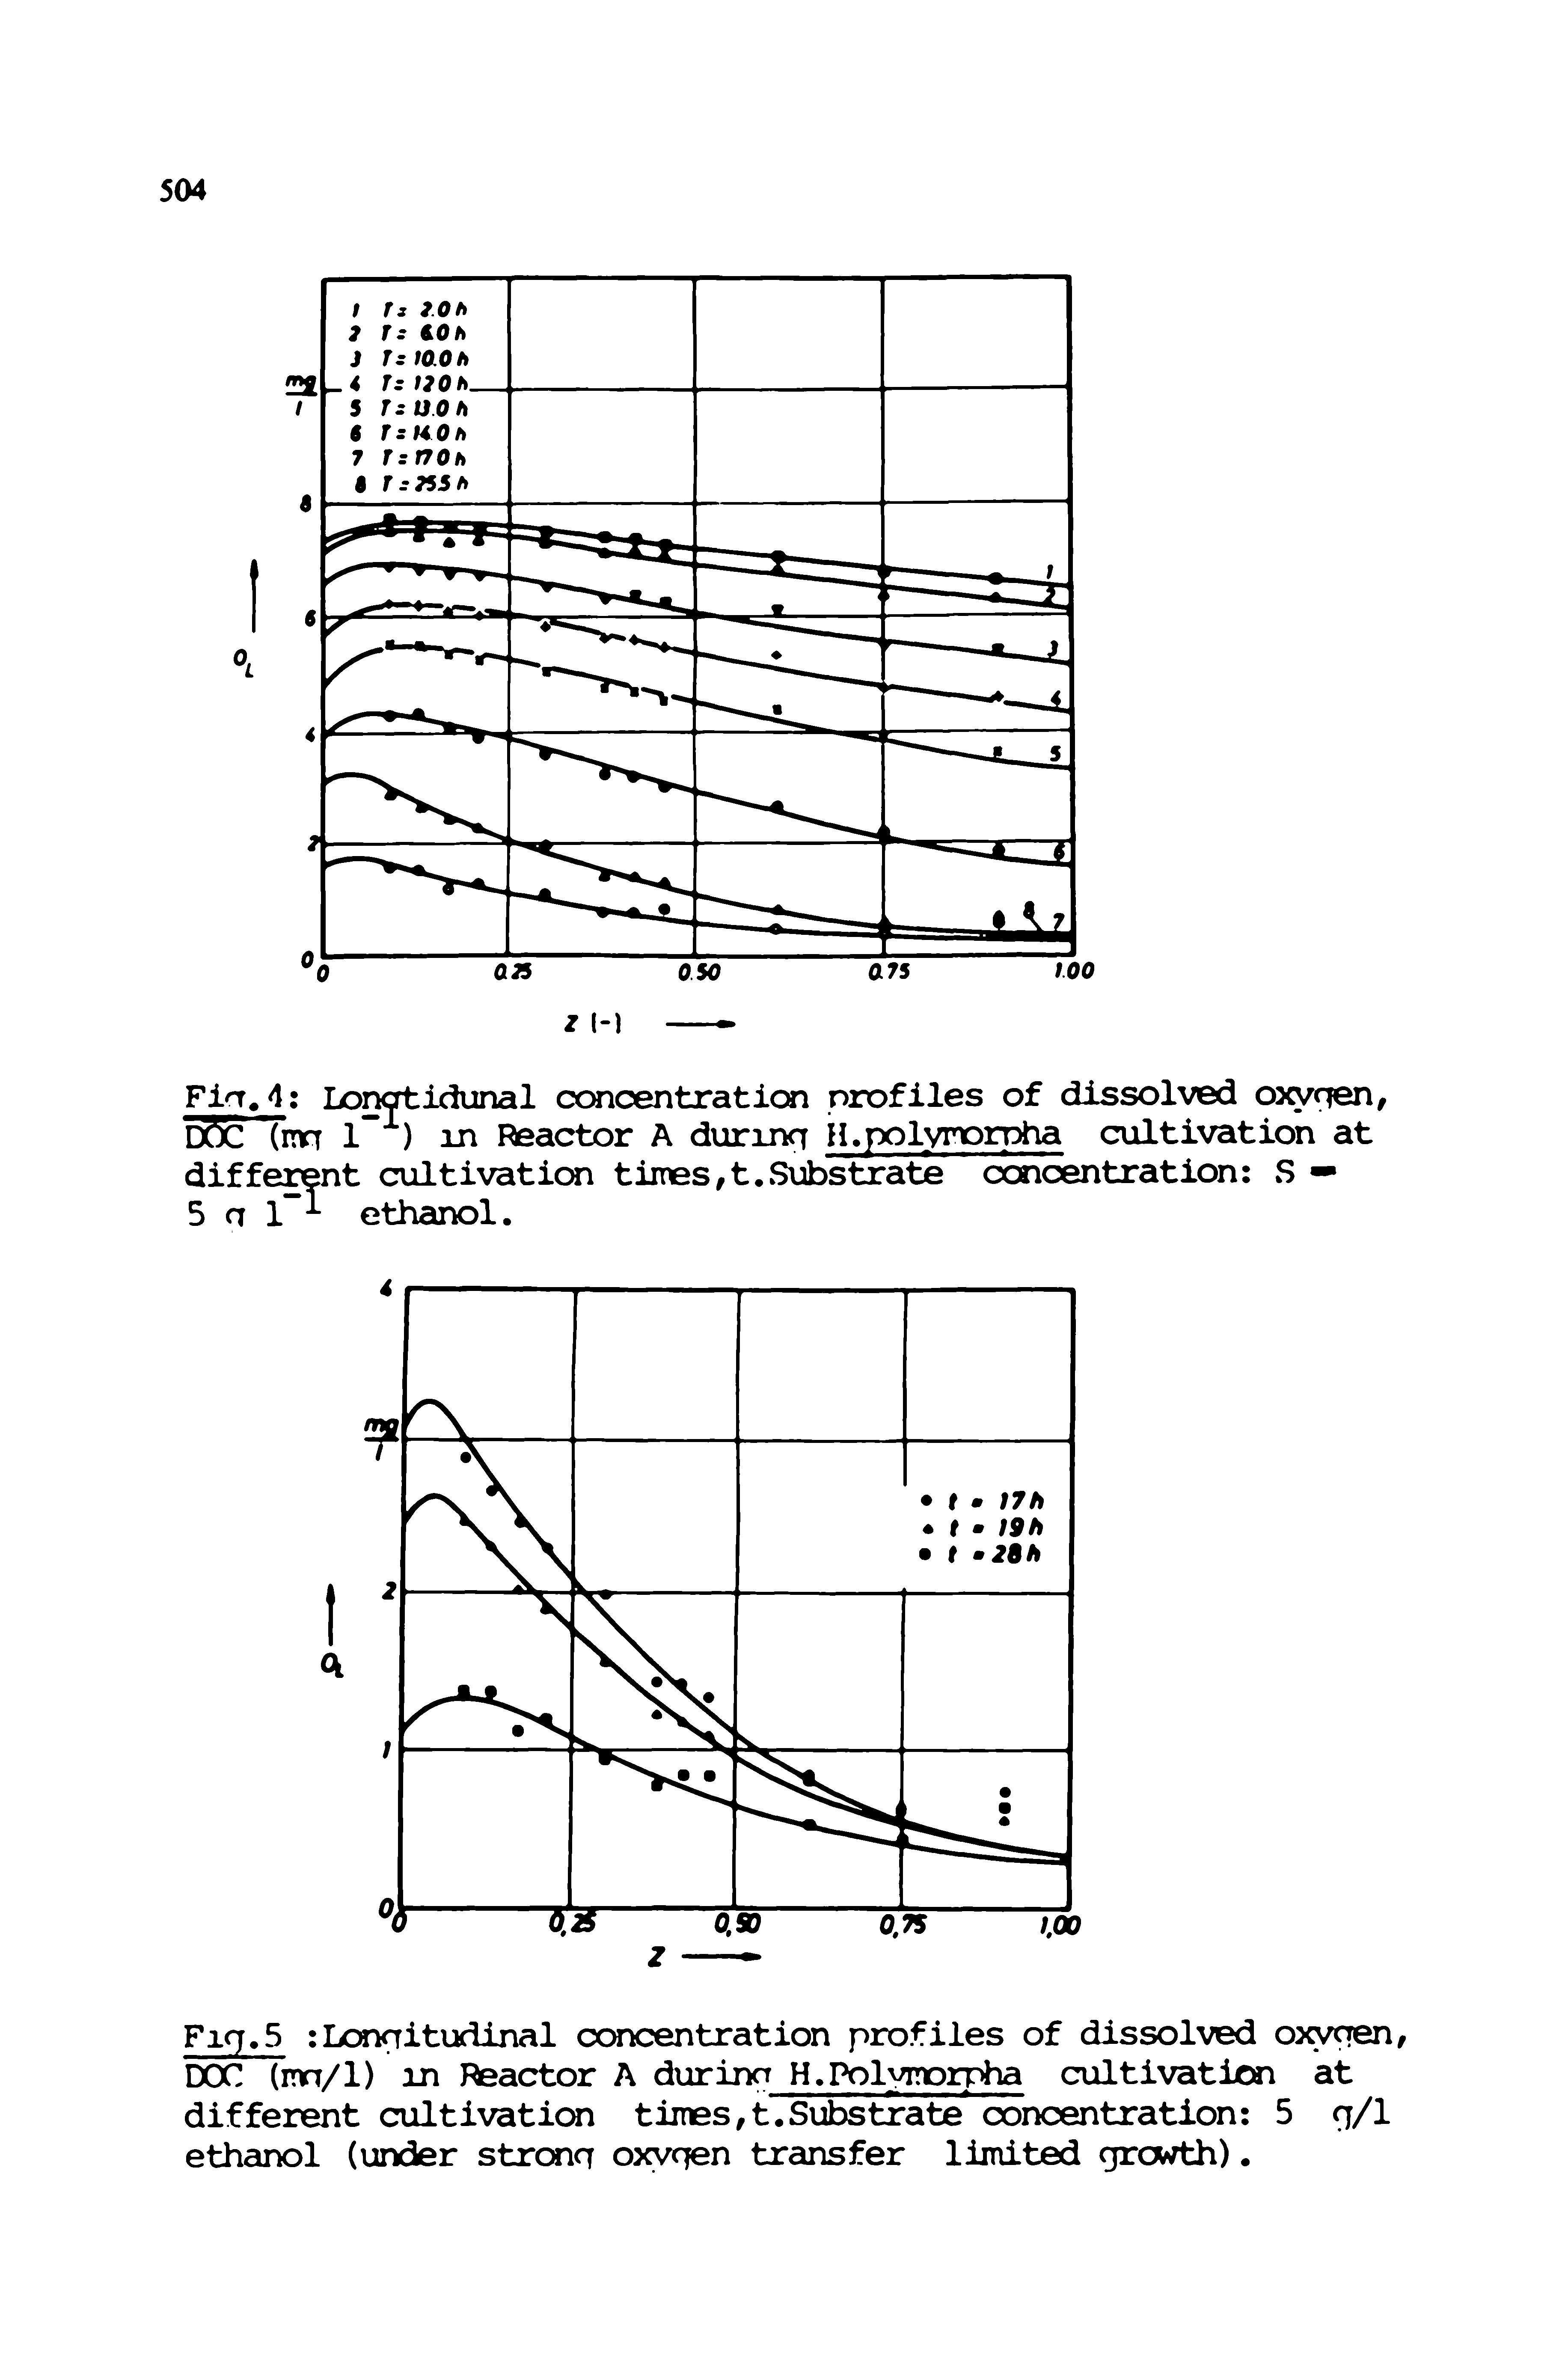 Fig. 5 Longitudinal ccaicentration profiles of dissolved owgen, DOC (mn/1) in Reactor A durinn H.Polymorrtia cultivation at different cultivation times,t.Substrate concentration 5 g/1 ethanol (under strong owgen transfer limited growth).